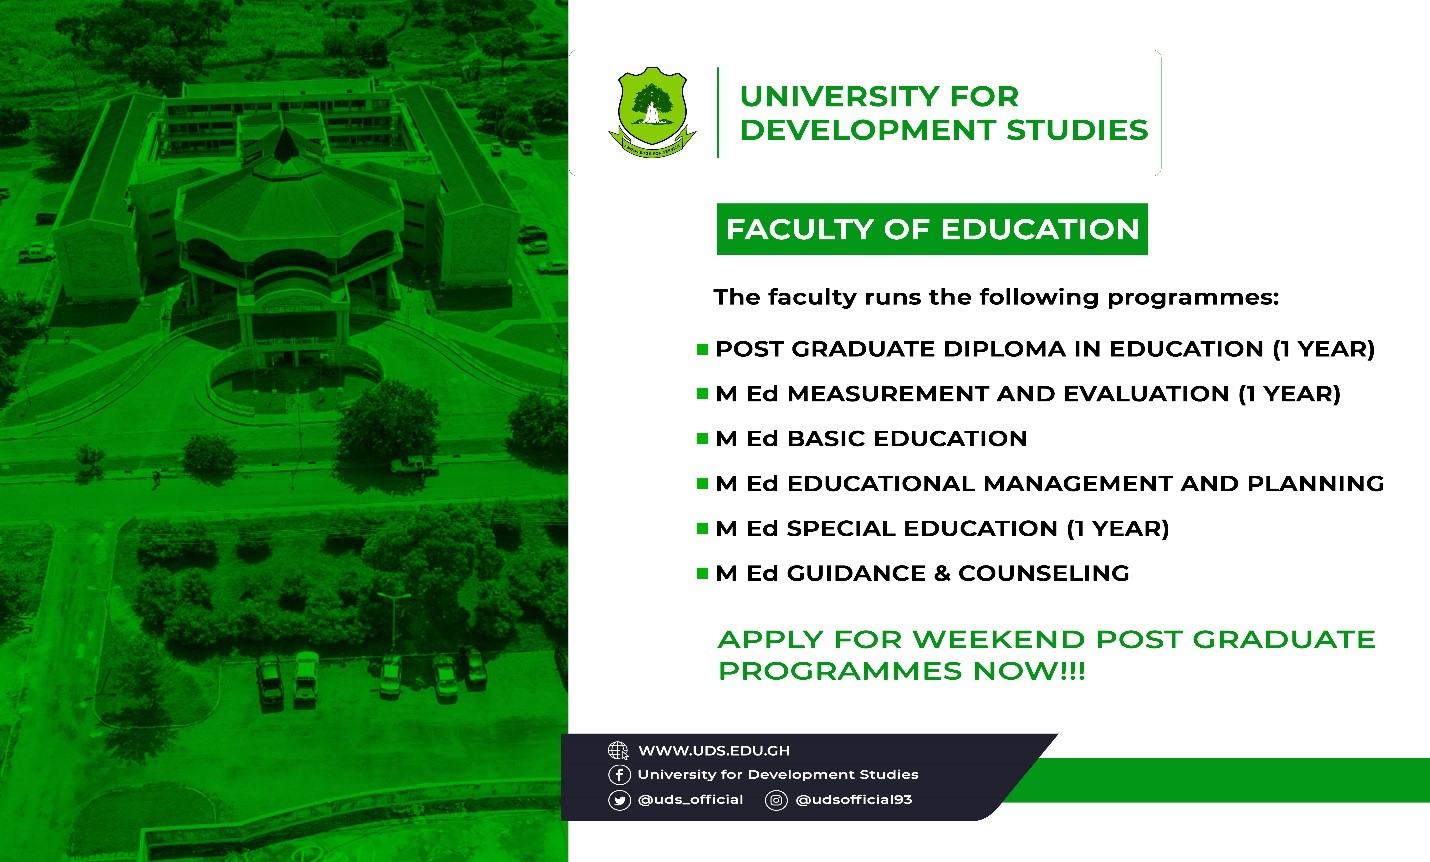 UDS Faculty Of Education Introduces Weekend Programmes